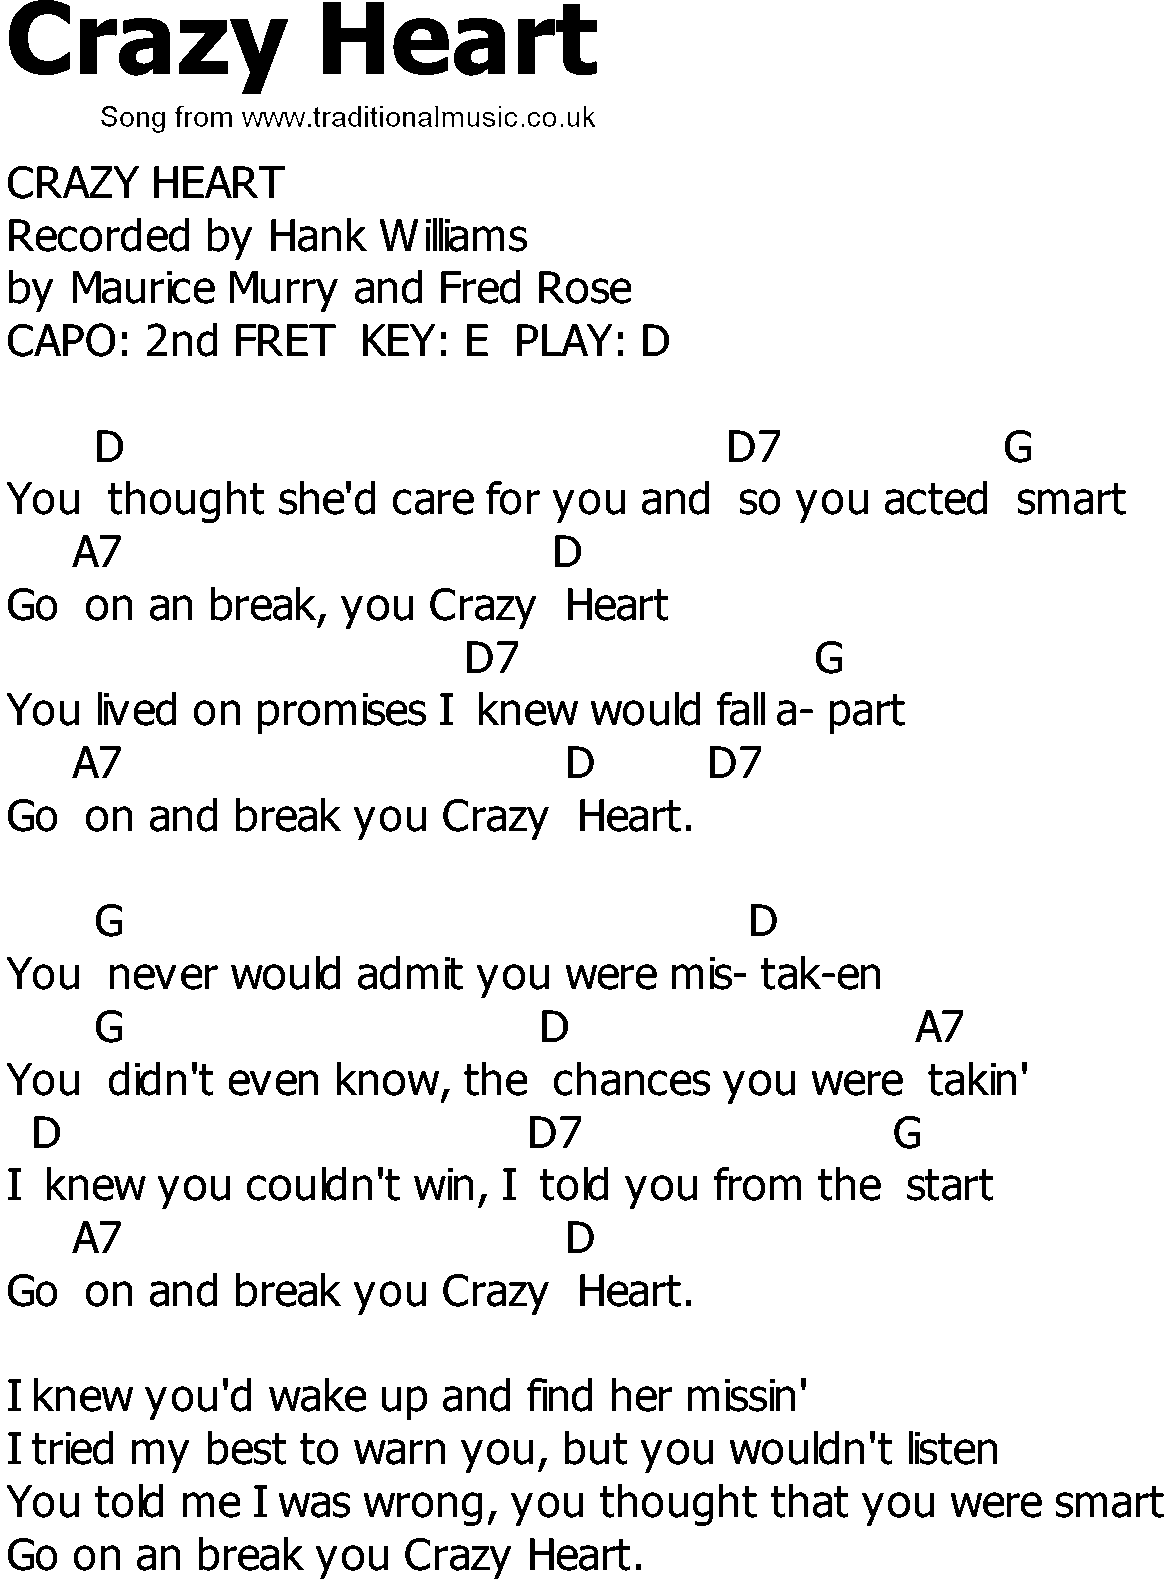 Old Country song lyrics with chords - Crazy Heart